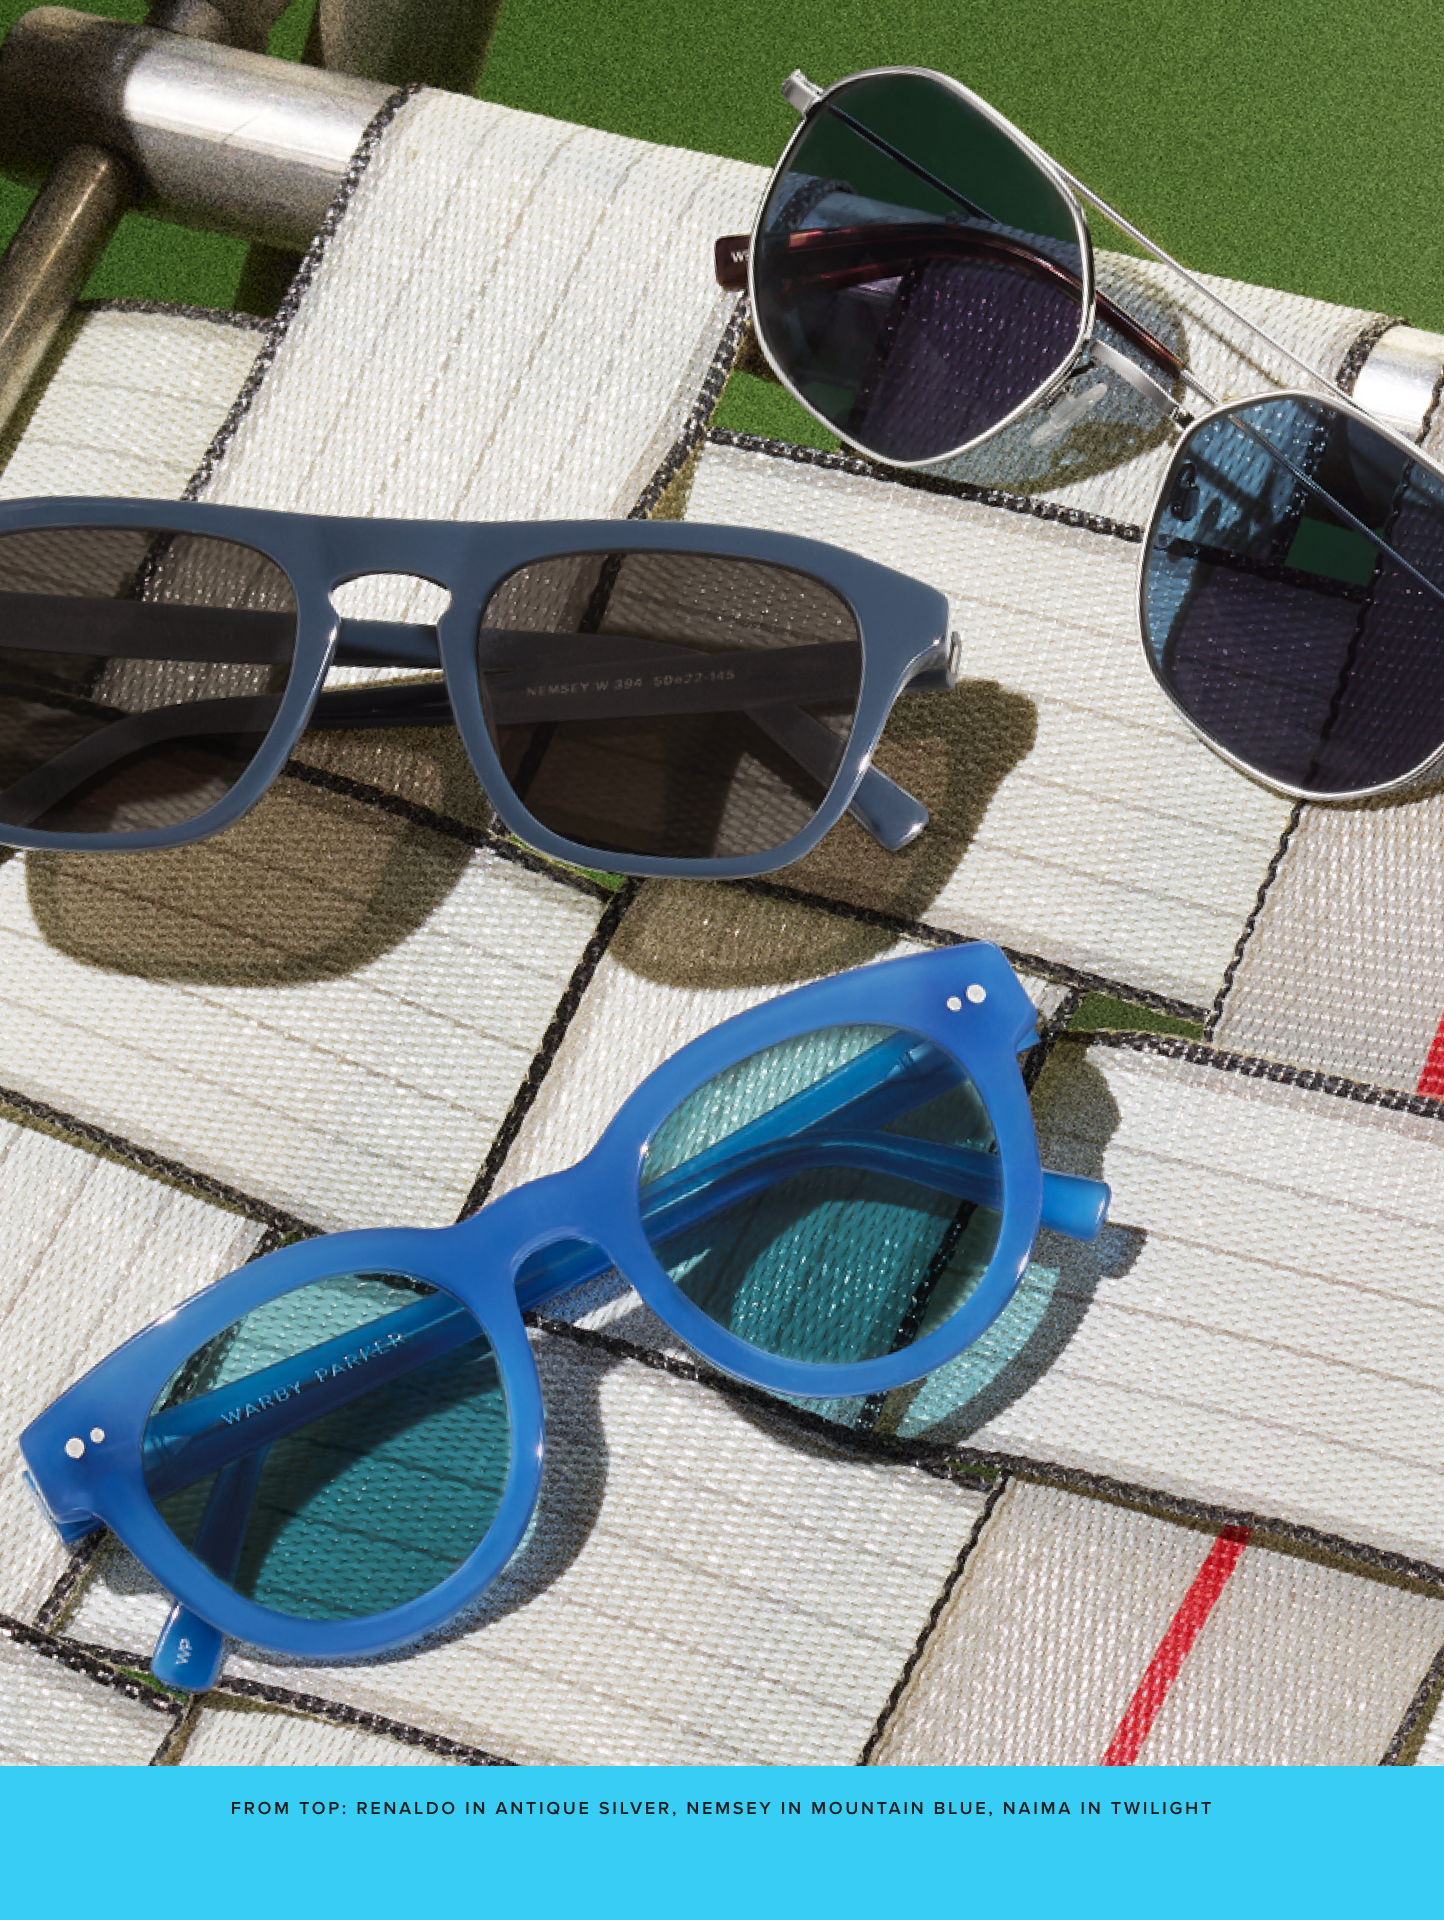 Three pairs of sunglasses lay on a lawn chair. From top: Renaldo in Antique Silver, Nemsey in Mountain Blue, Naima in Twilight